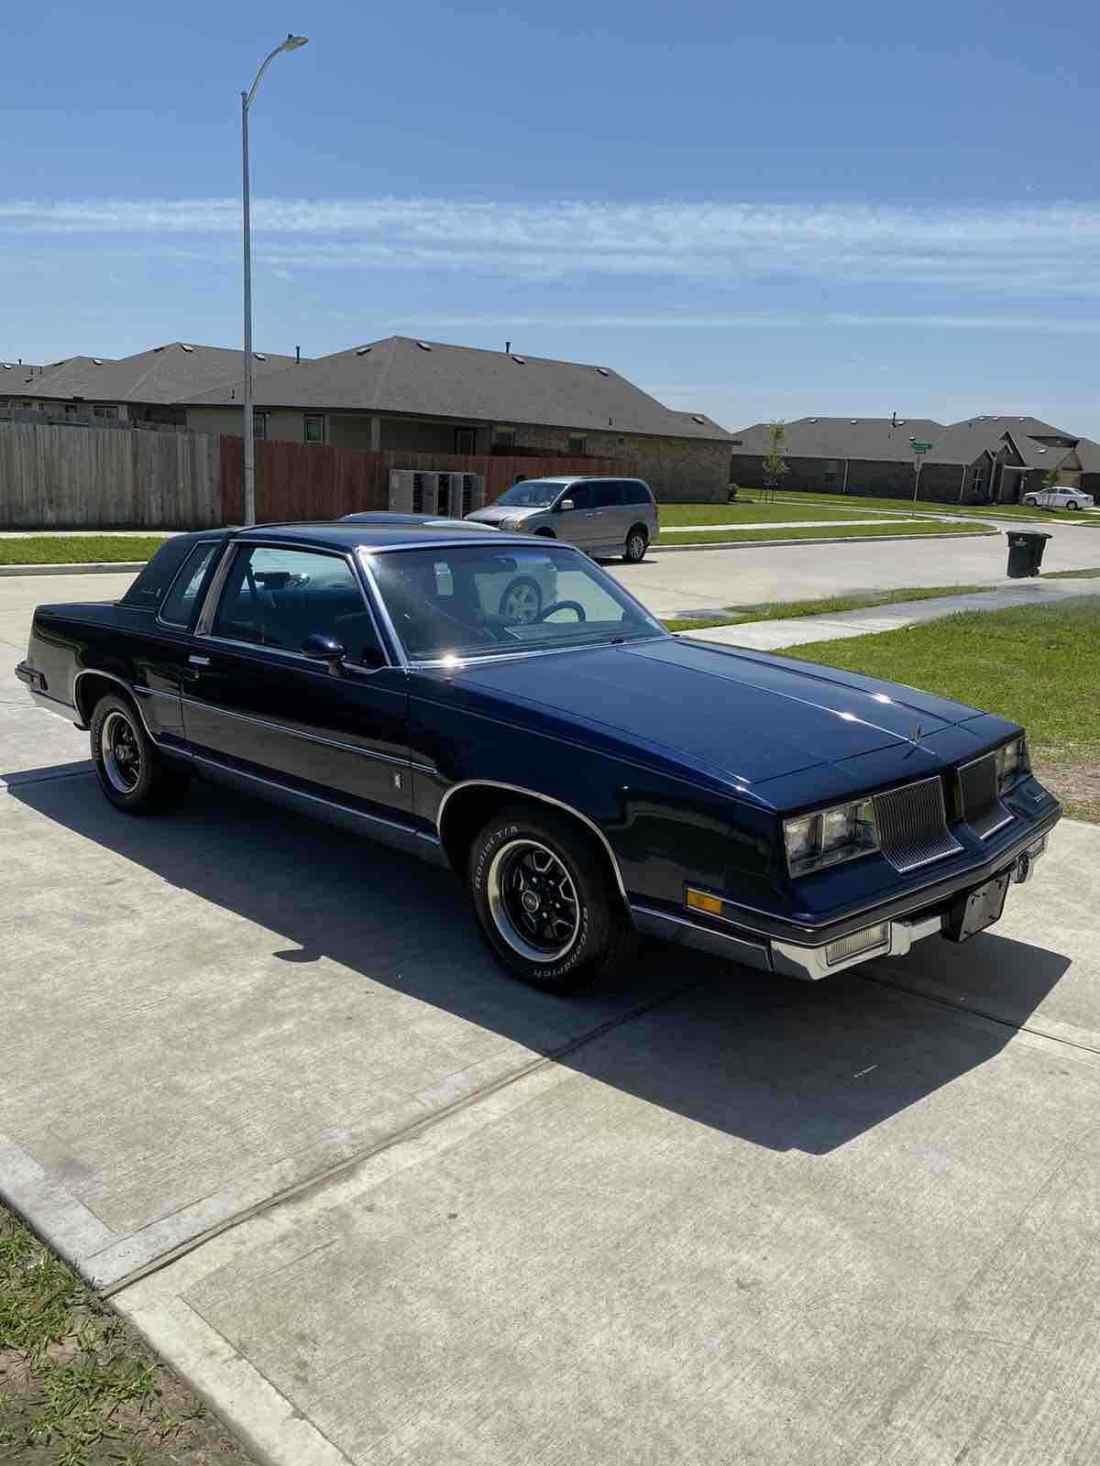 1986 Oldsmobile Cutlass Supreme Coupe Blue Rwd Automatic Brougham For Sale Oldsmobile Cutlass